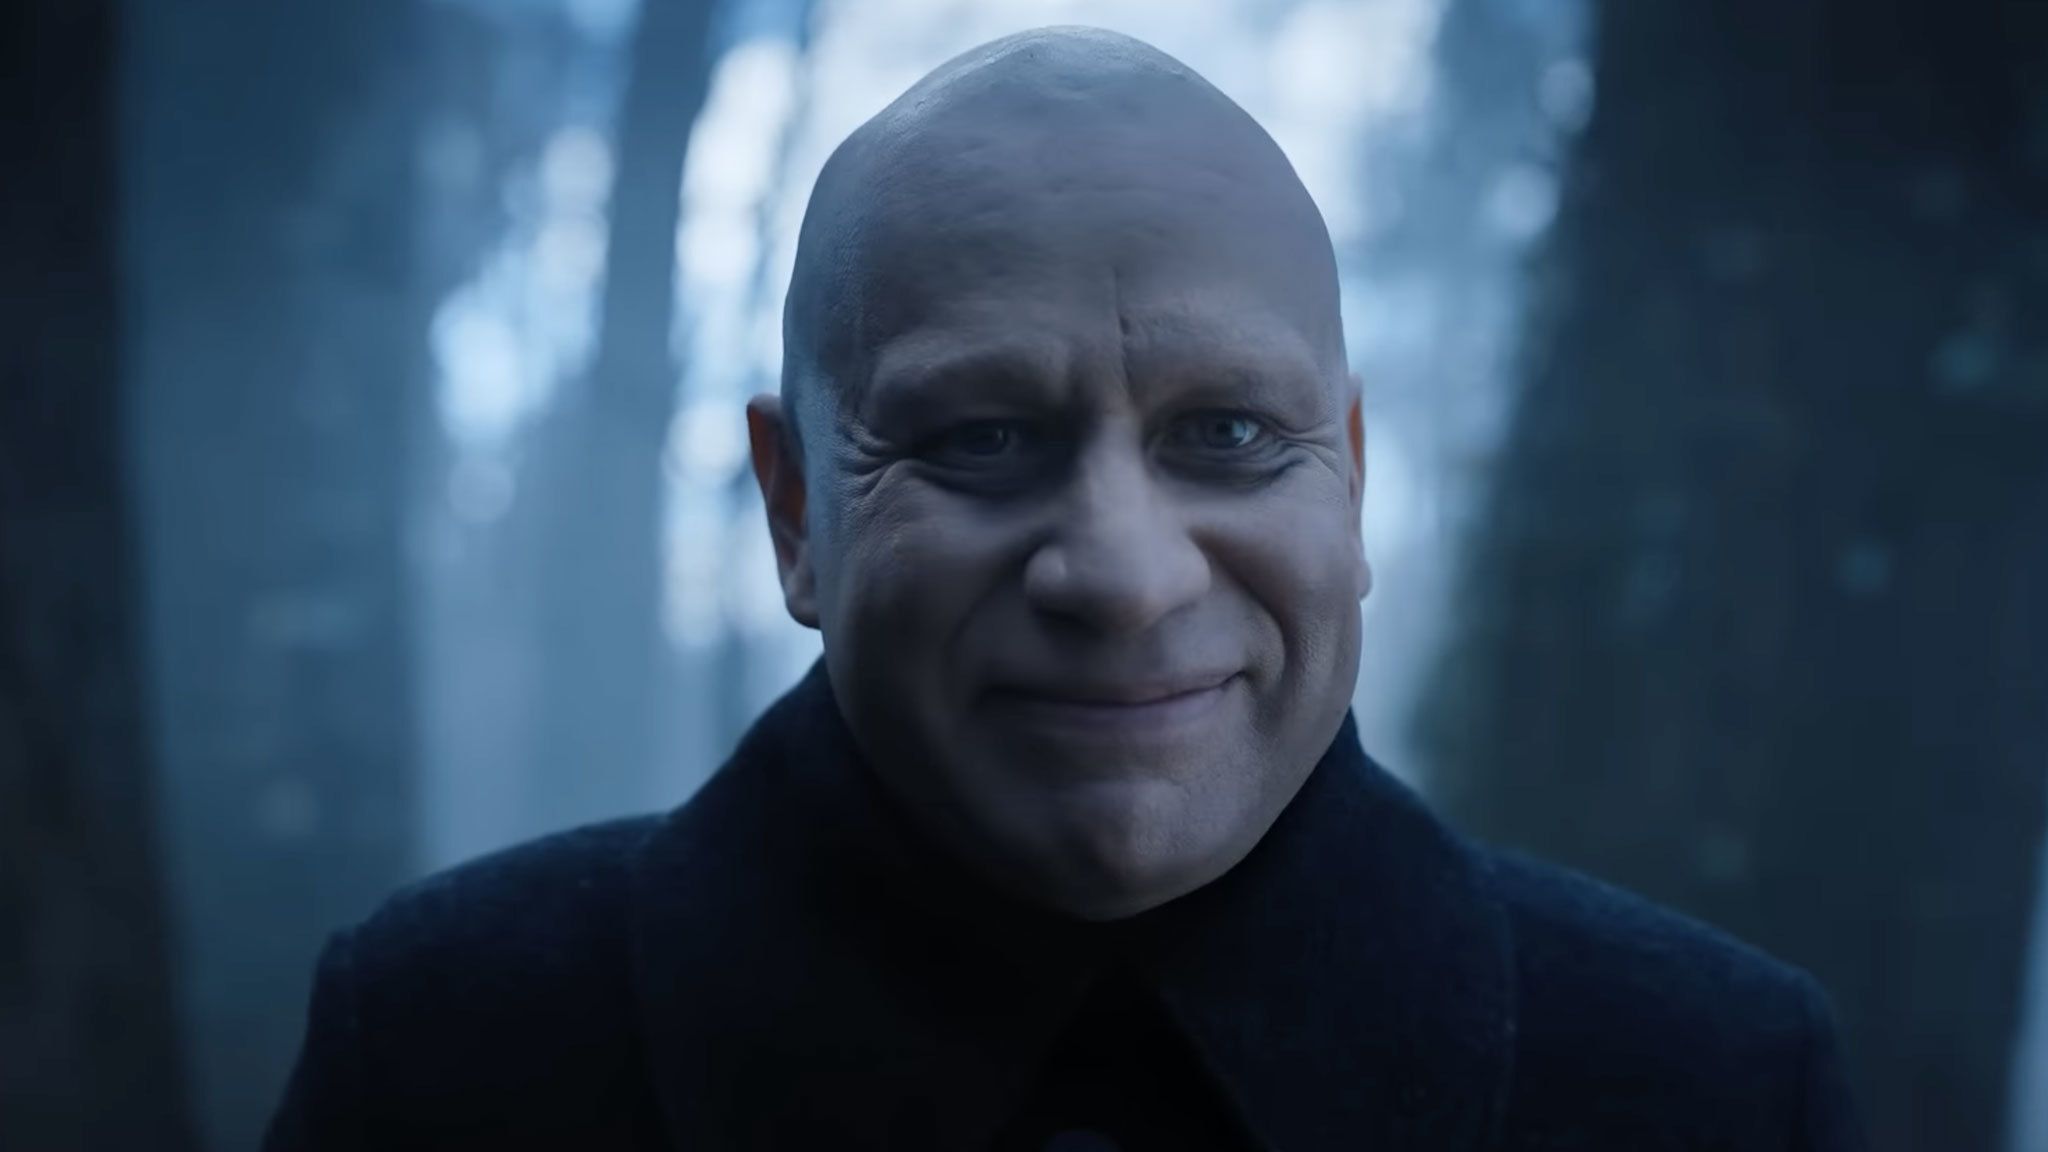 Wednesday: Uncle Fester